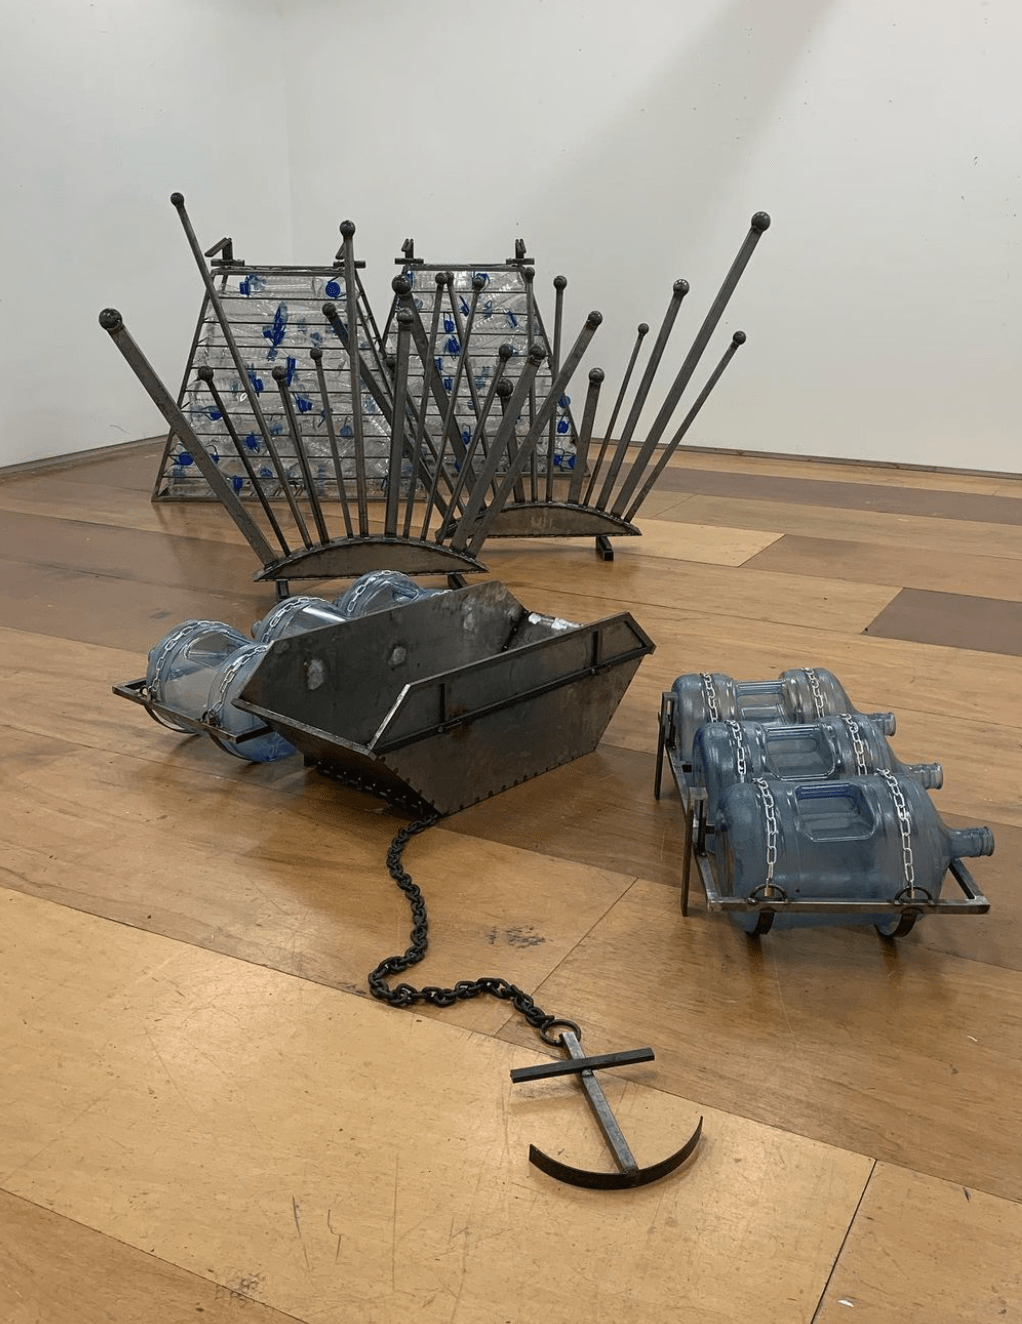 An image of several metal objects, including a skip chained to an anchor, sat on a wooden floor.